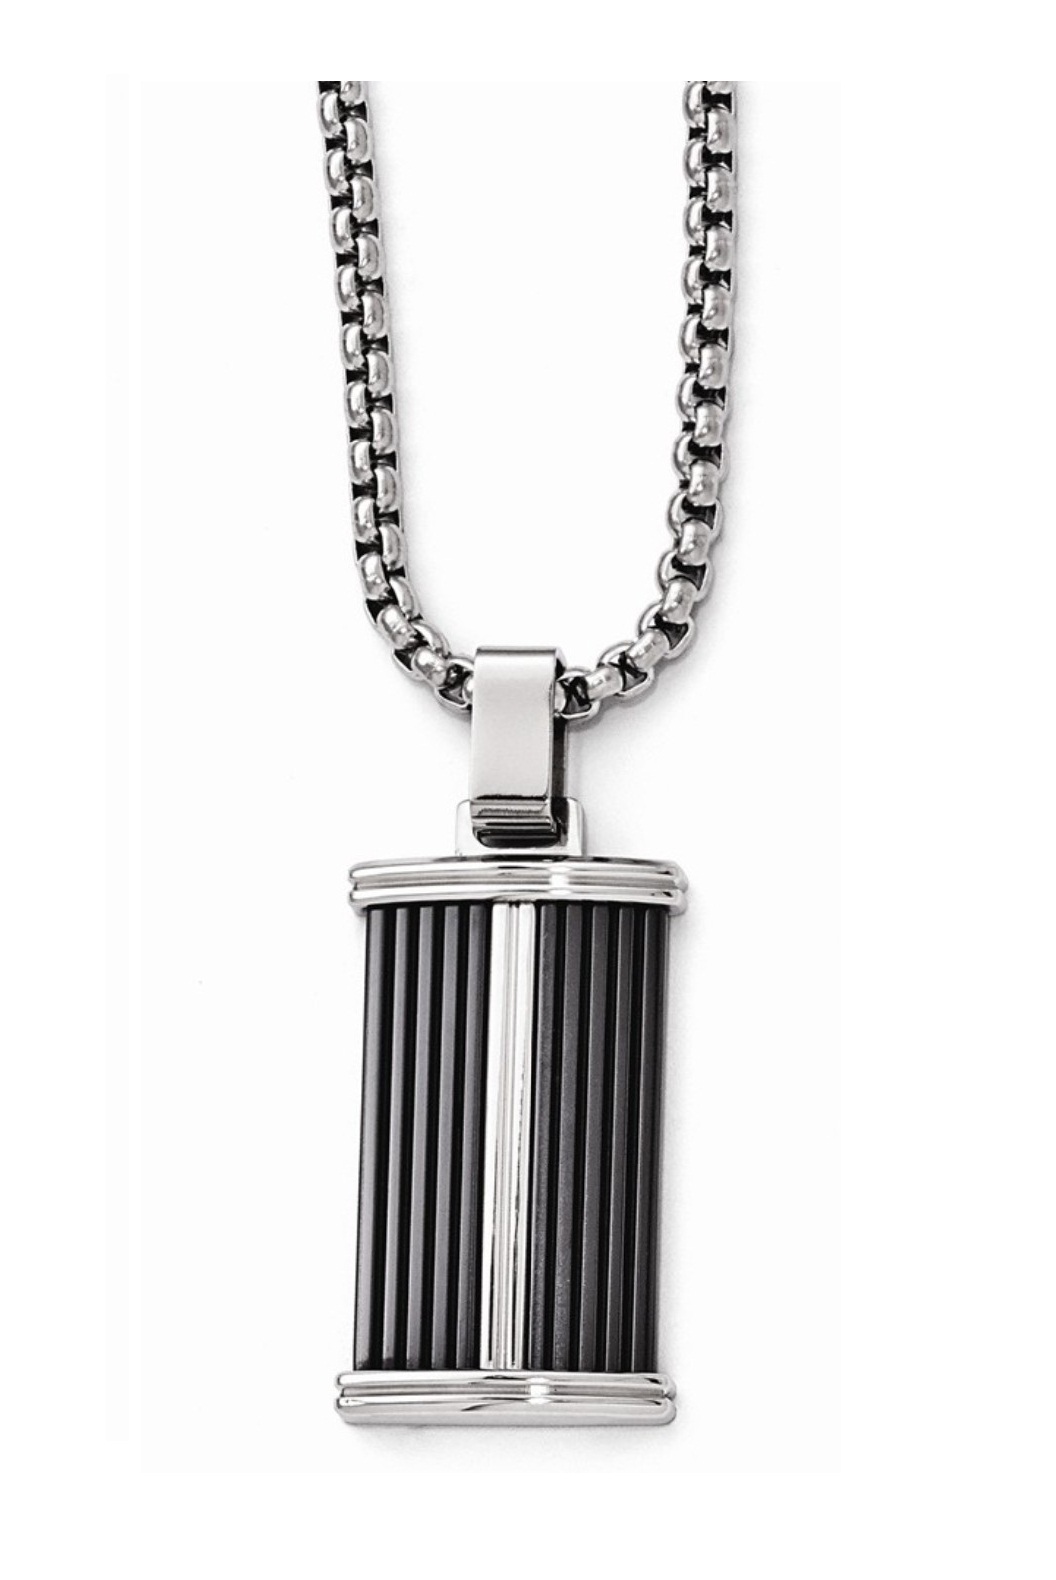  Black Ti And Stainless Steel Necklace